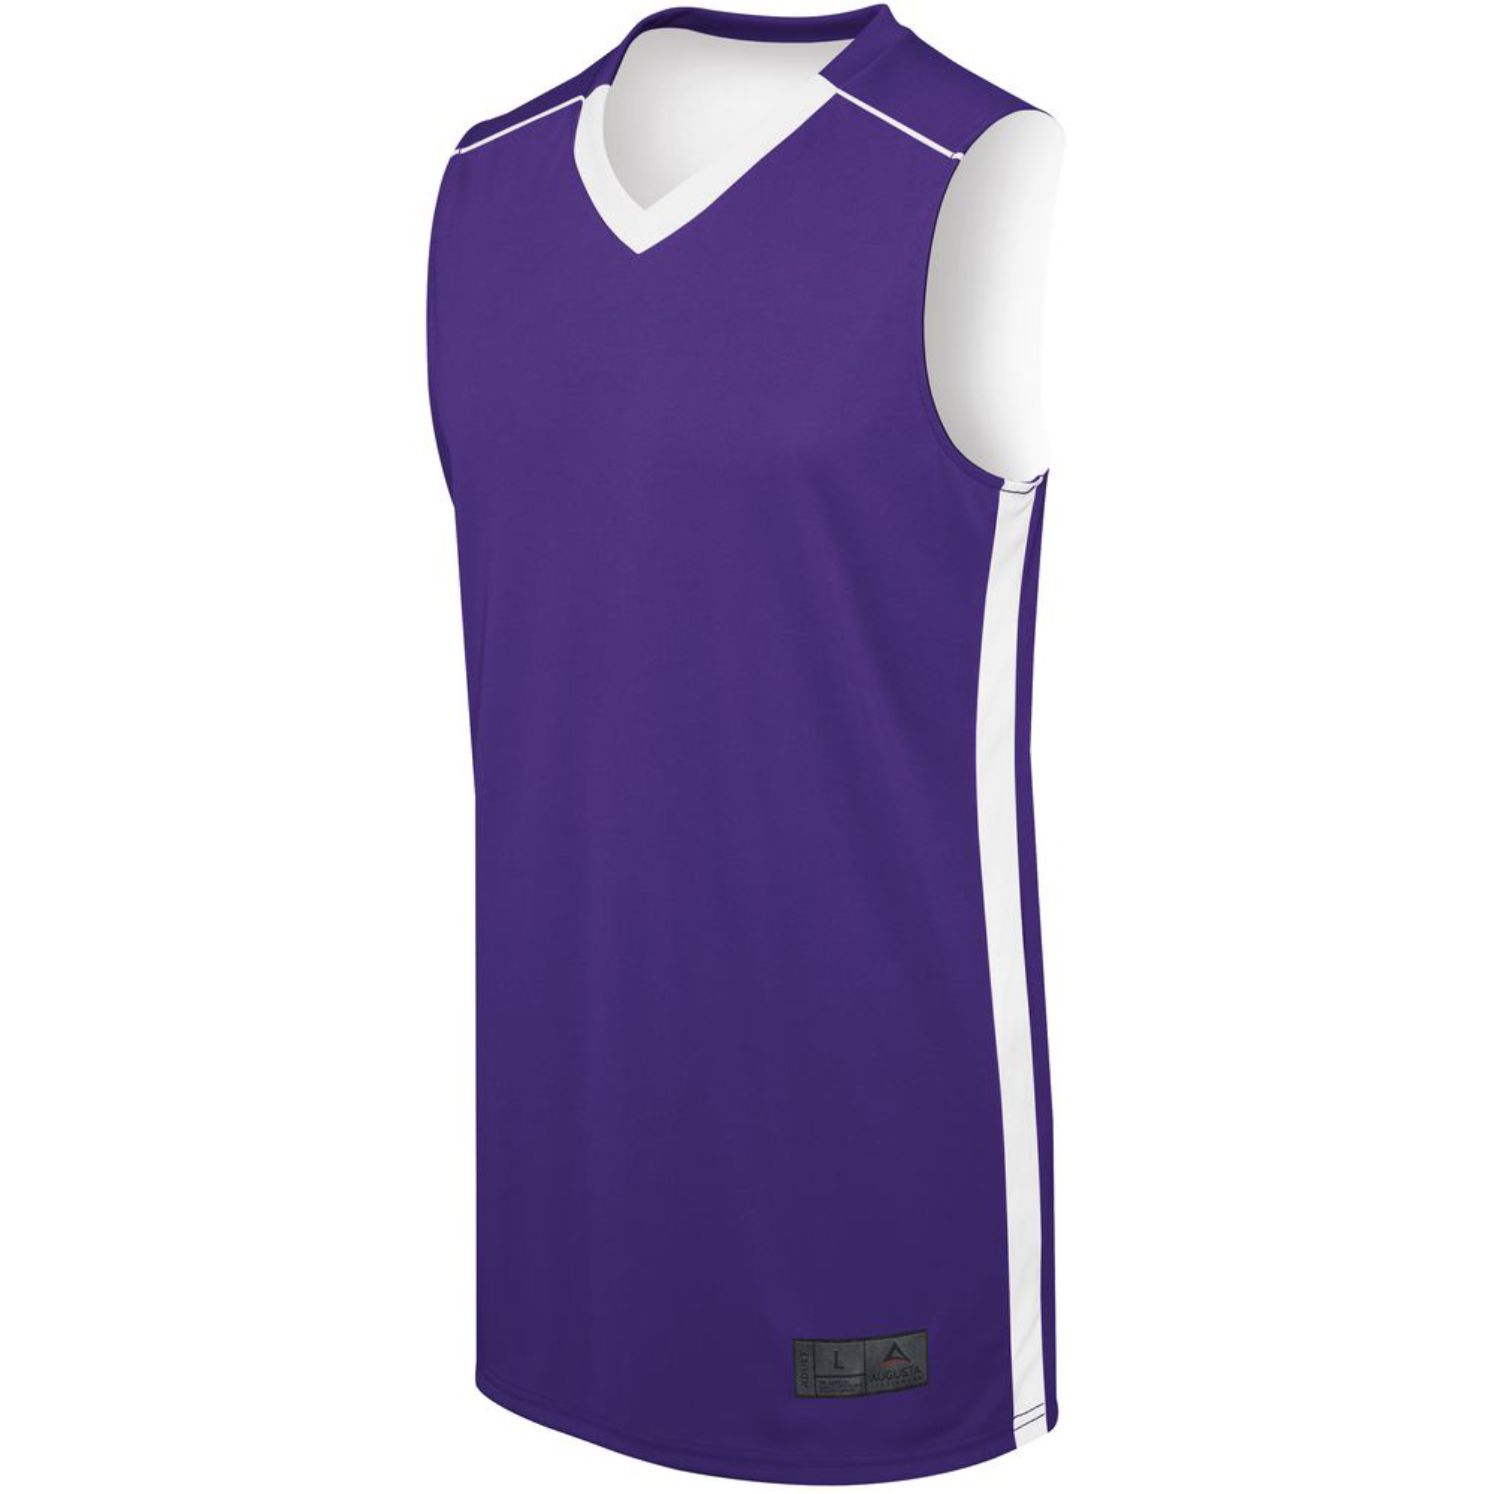 Augusta Sportswear Adult Competition Reversible Jersey #332400 Purple / White